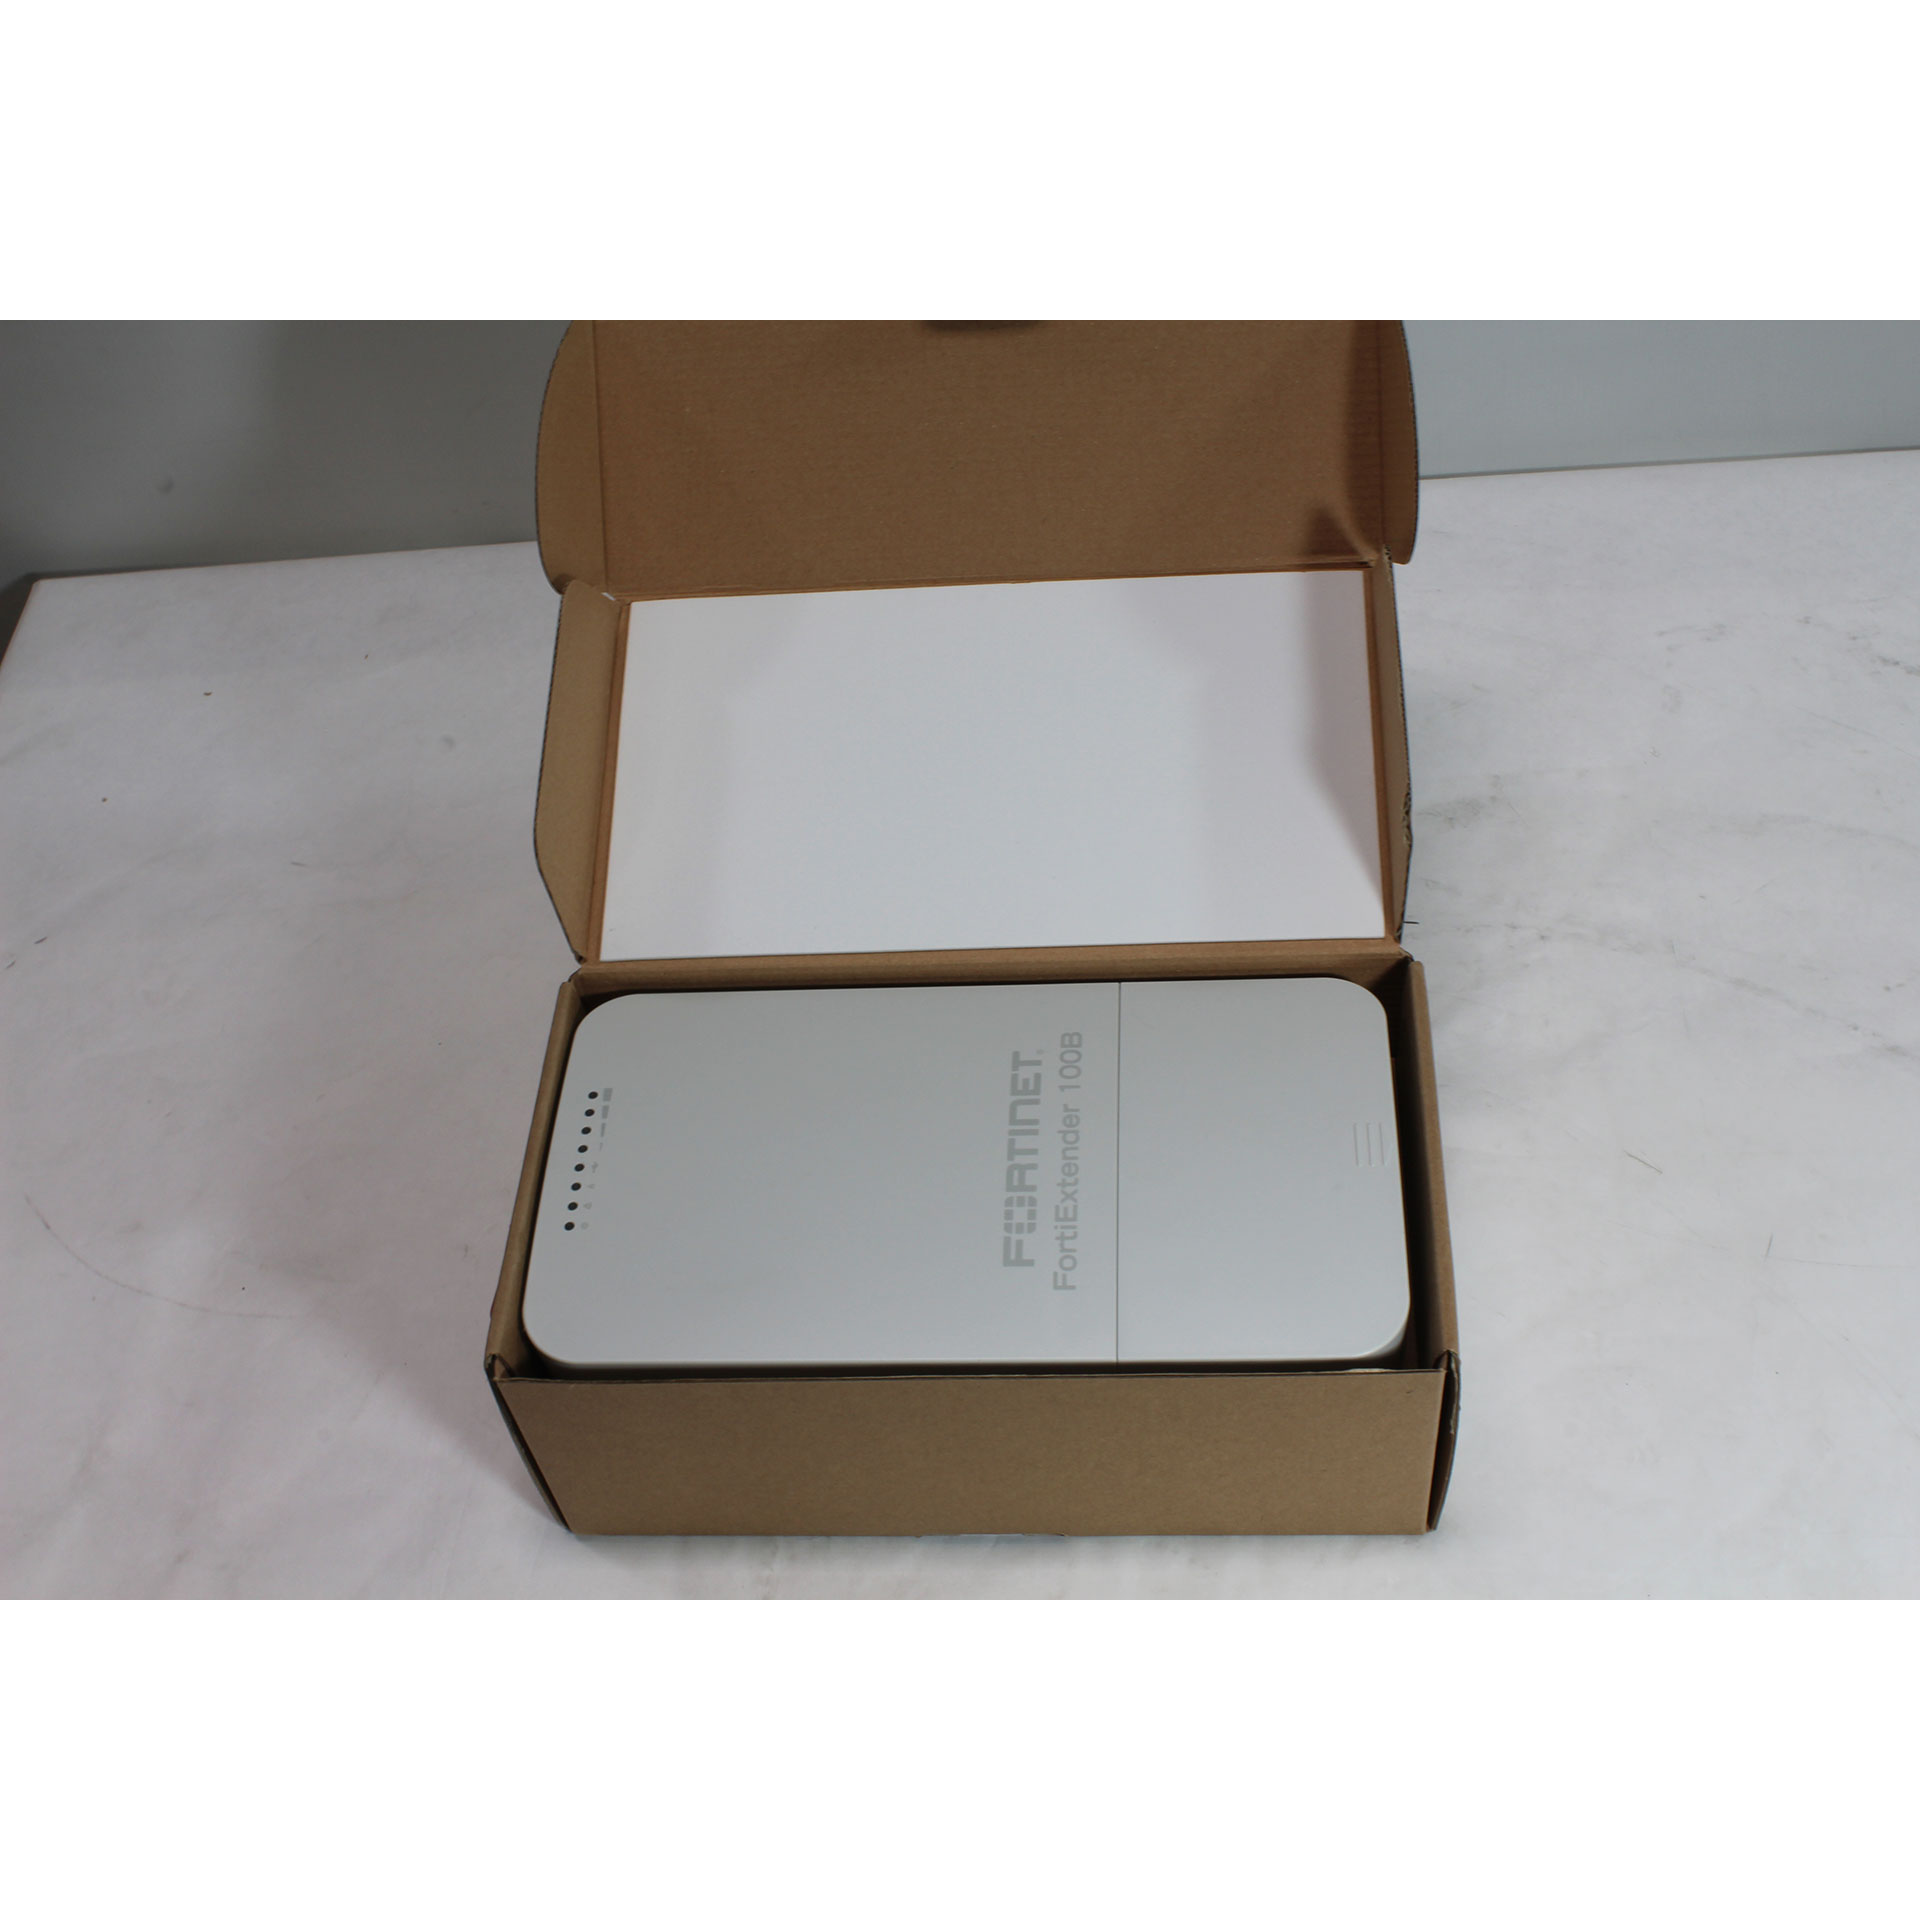 Fortinet FortiExtender 100B Cellular Wireless Router FEX-100B